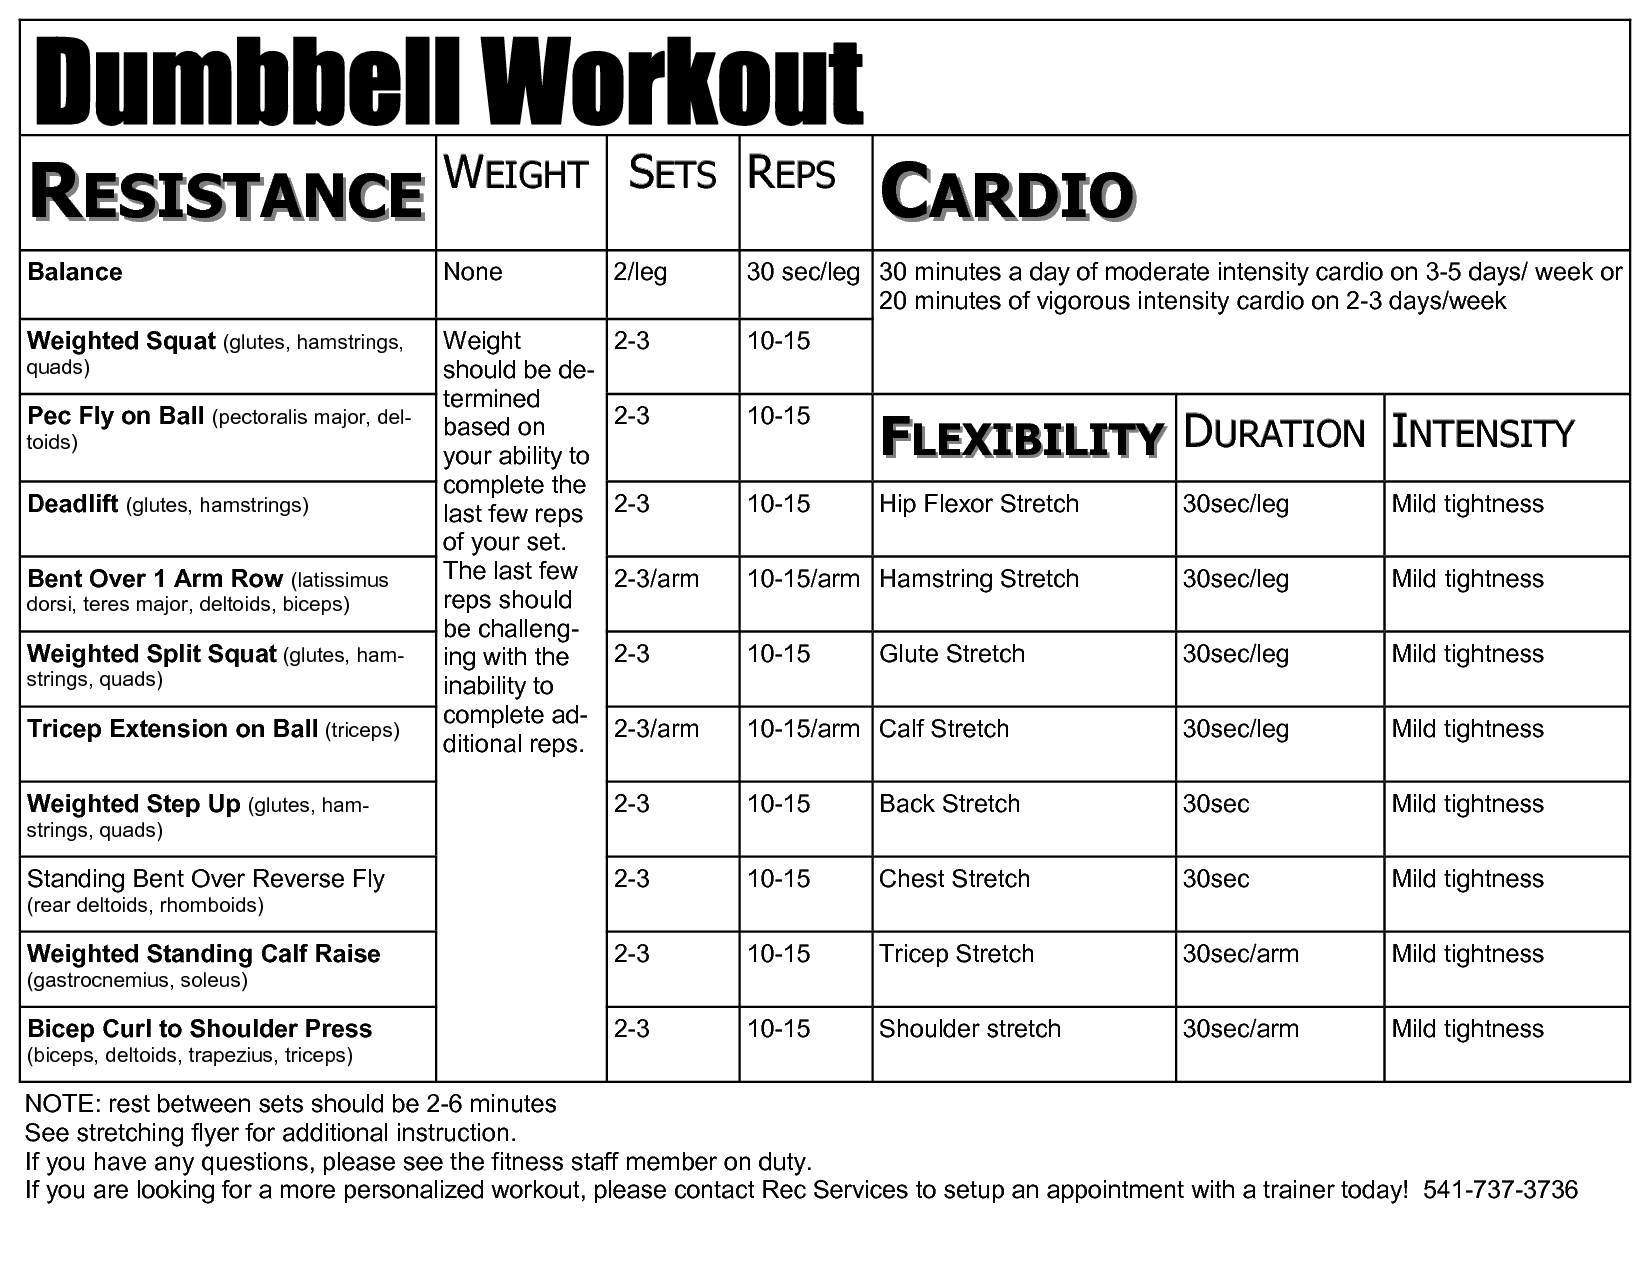 4-best-images-of-printable-dumbbell-workouts-for-men-women-full-body-dumbbell-workout-circuit